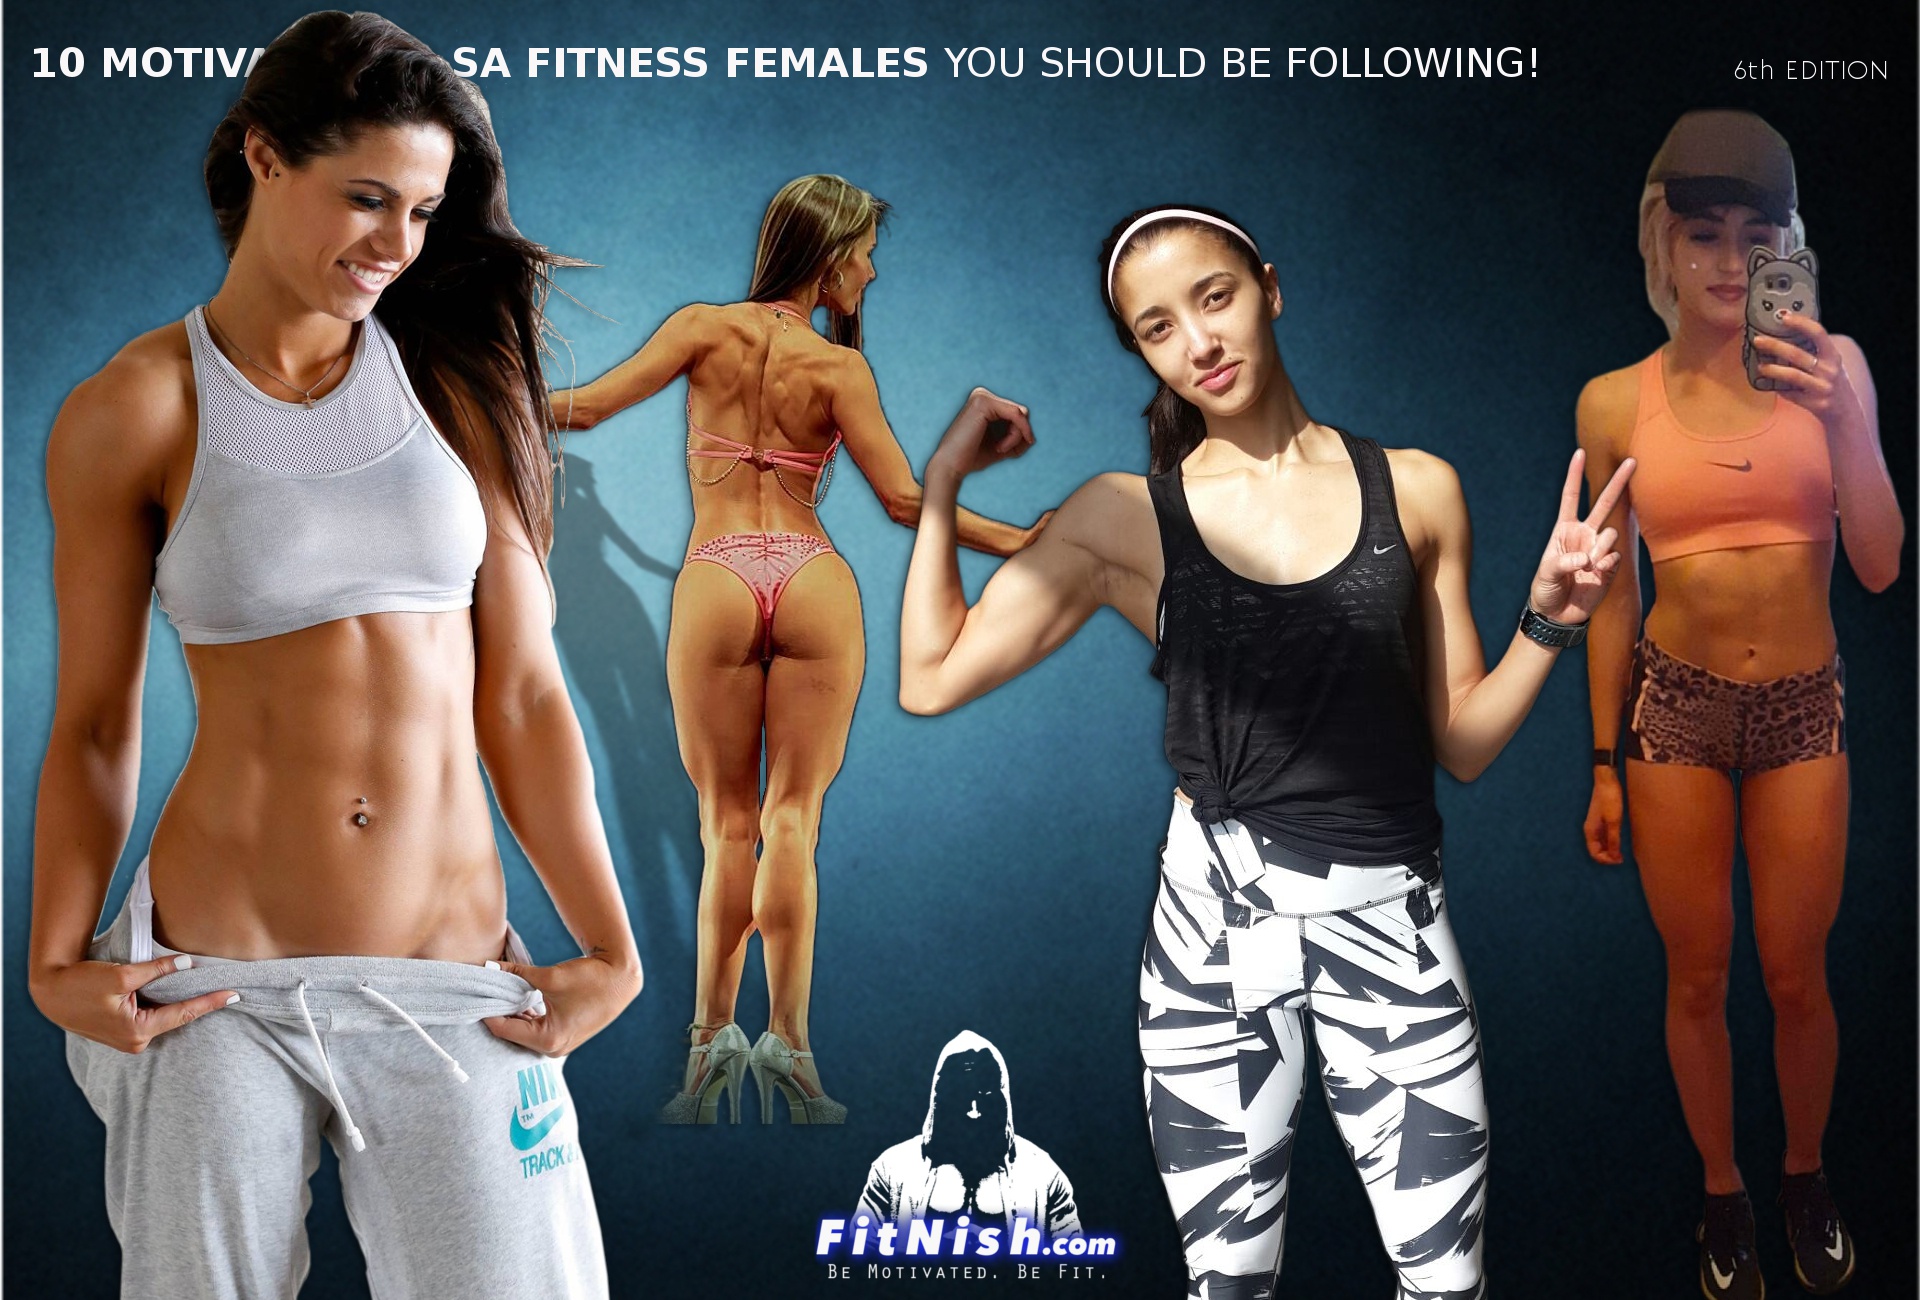 10 Motivational SA Fitness Females You Should Be Following! 6th Edition